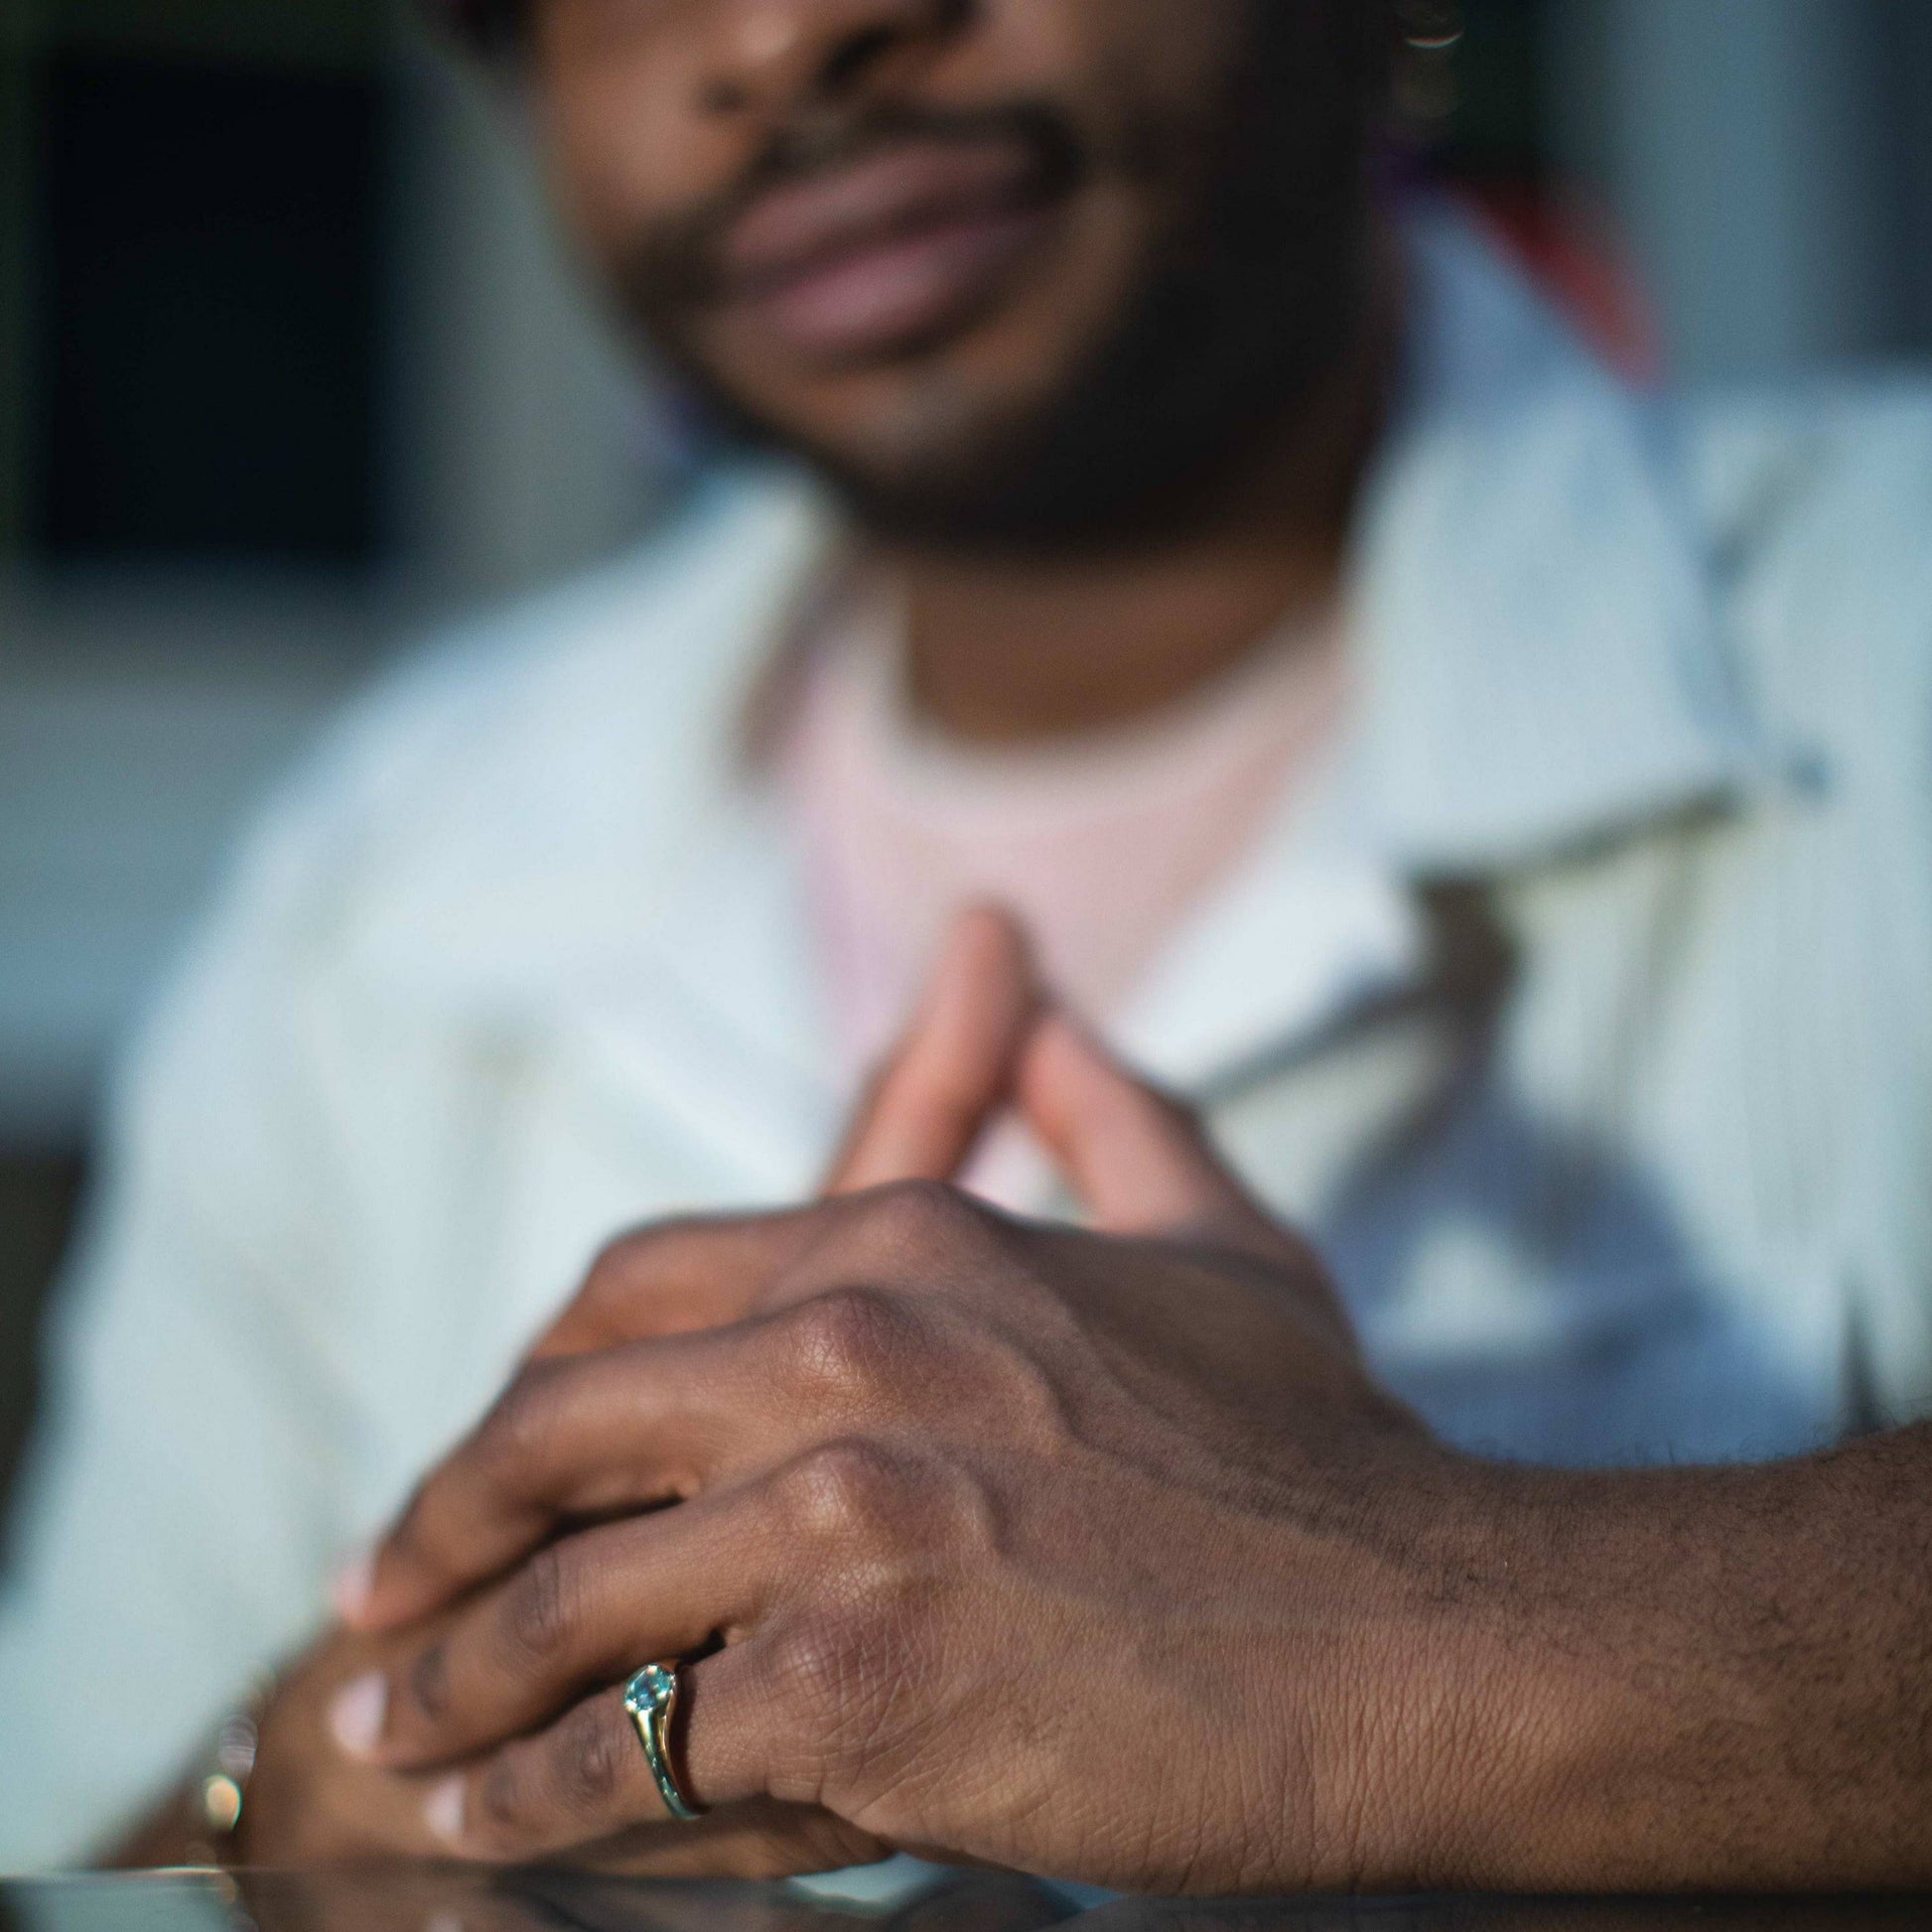 Tyler has this ring on his pinky finger and is sitting with his hands clasped which are in focus.  Our of focus is his torso and face with a slight smile.